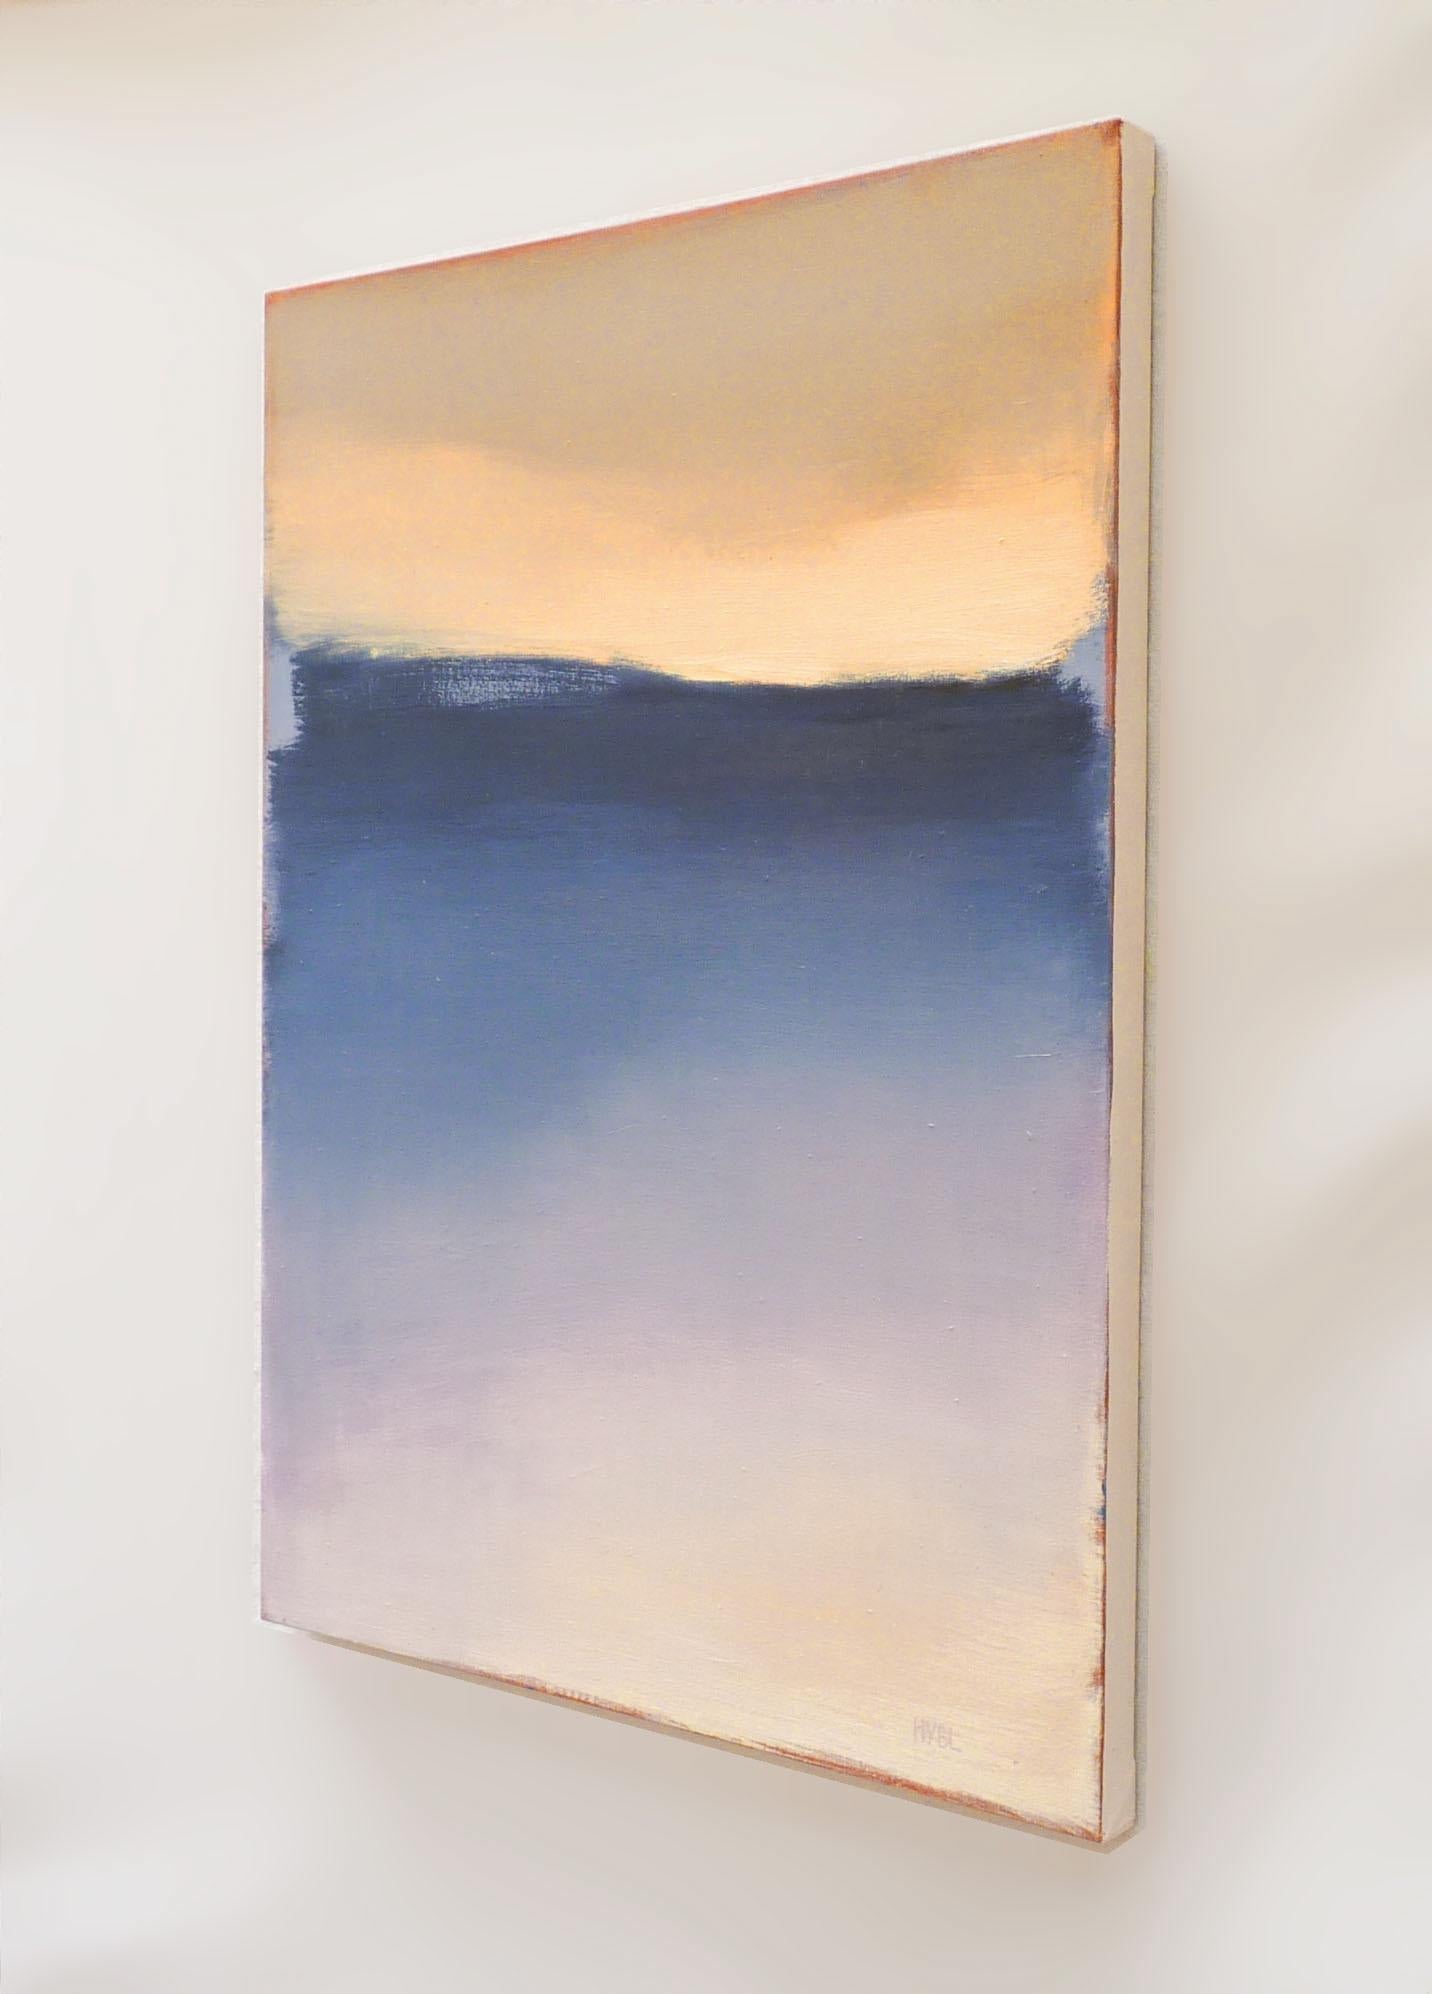 <p>Artist Comments<br>Artist Heidi Hybl presents an abstract seascape with soft tones of cool lavender, deep blue, and warm beige. Part of her series of abstractions that draw inspiration from her immediate environment. Living near the Pacific